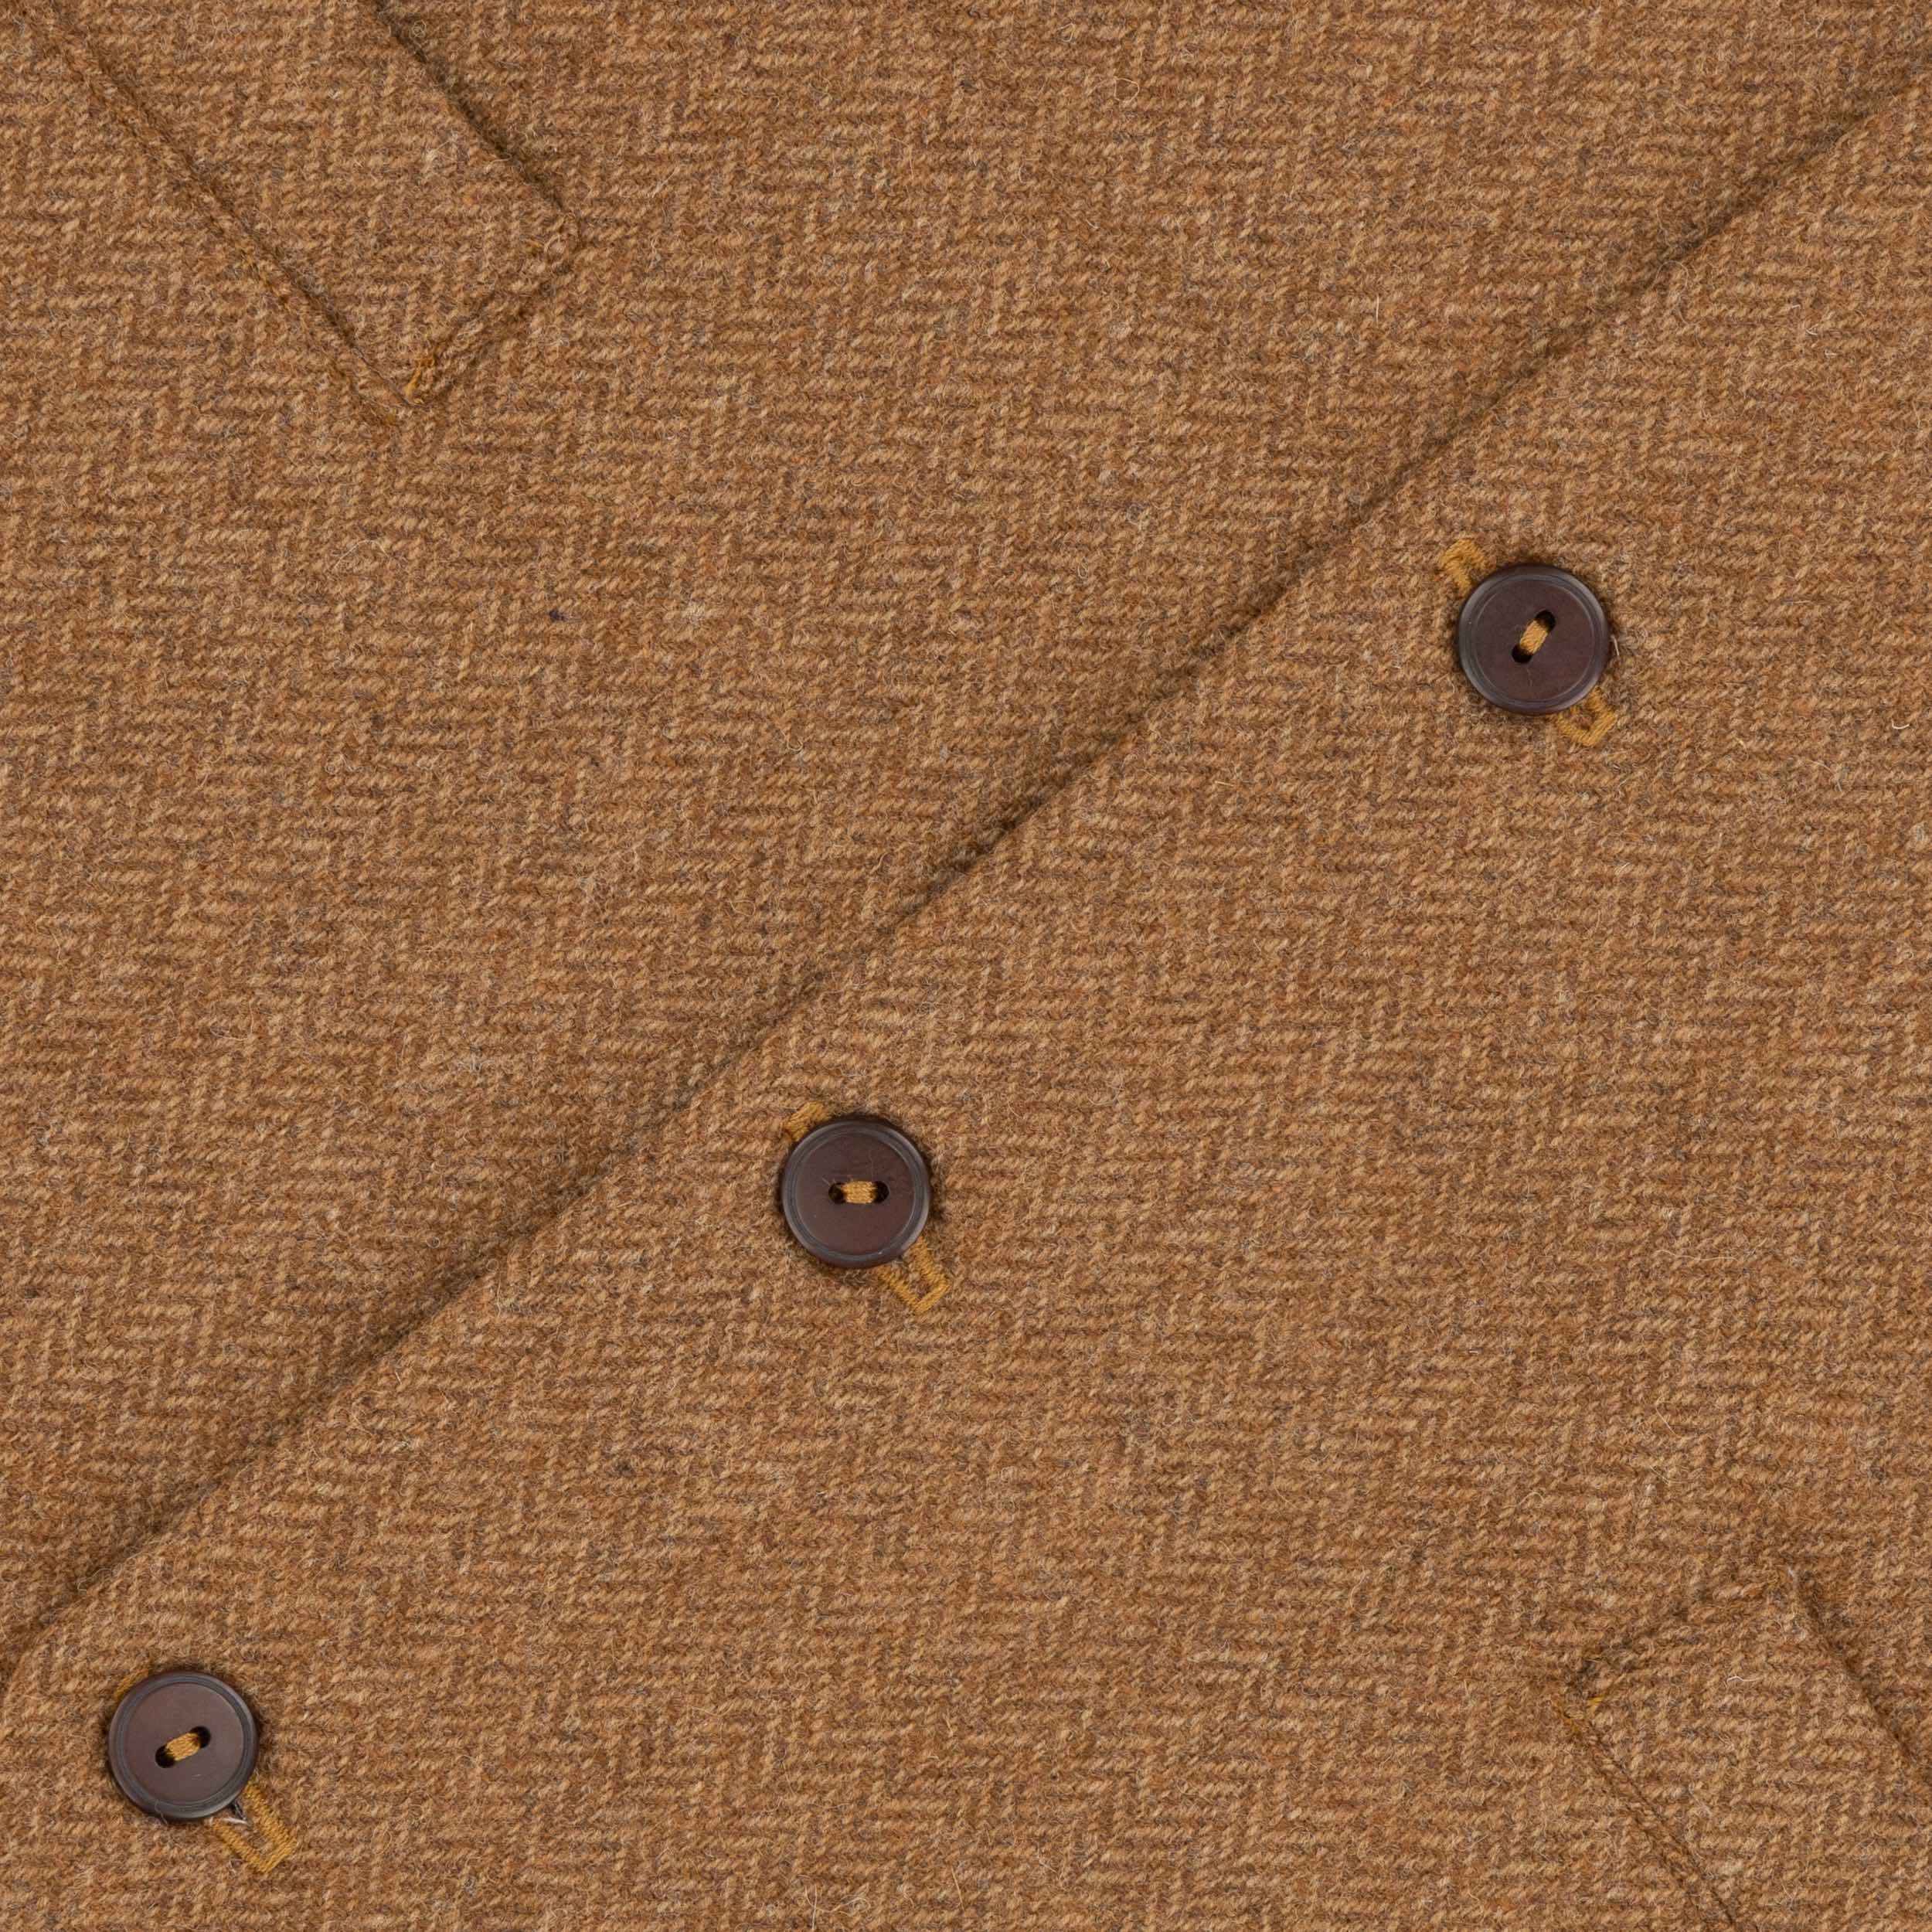 Close up of the button detail on the Carrier Company Men's Wool Waistcoat in Ginger Herringbone